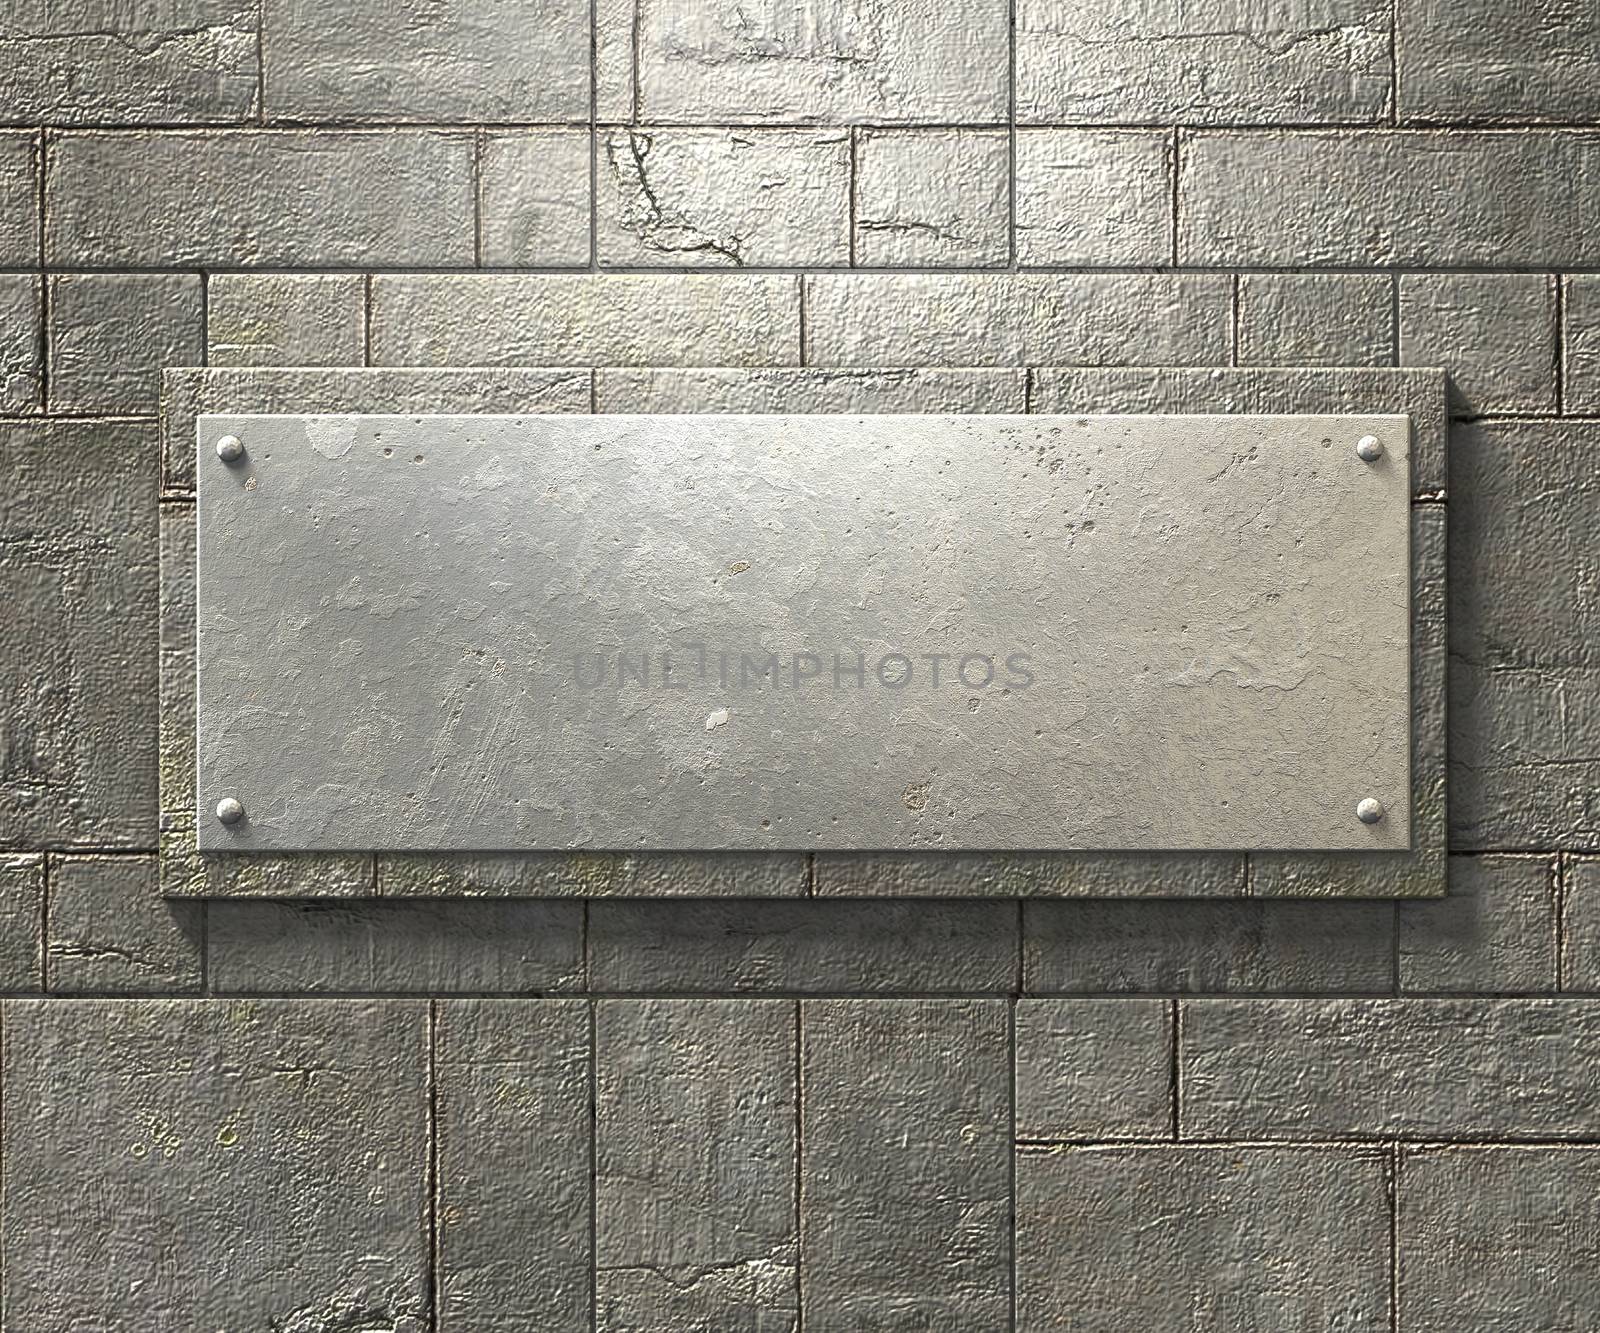 Metal plate background by dynamicfoto